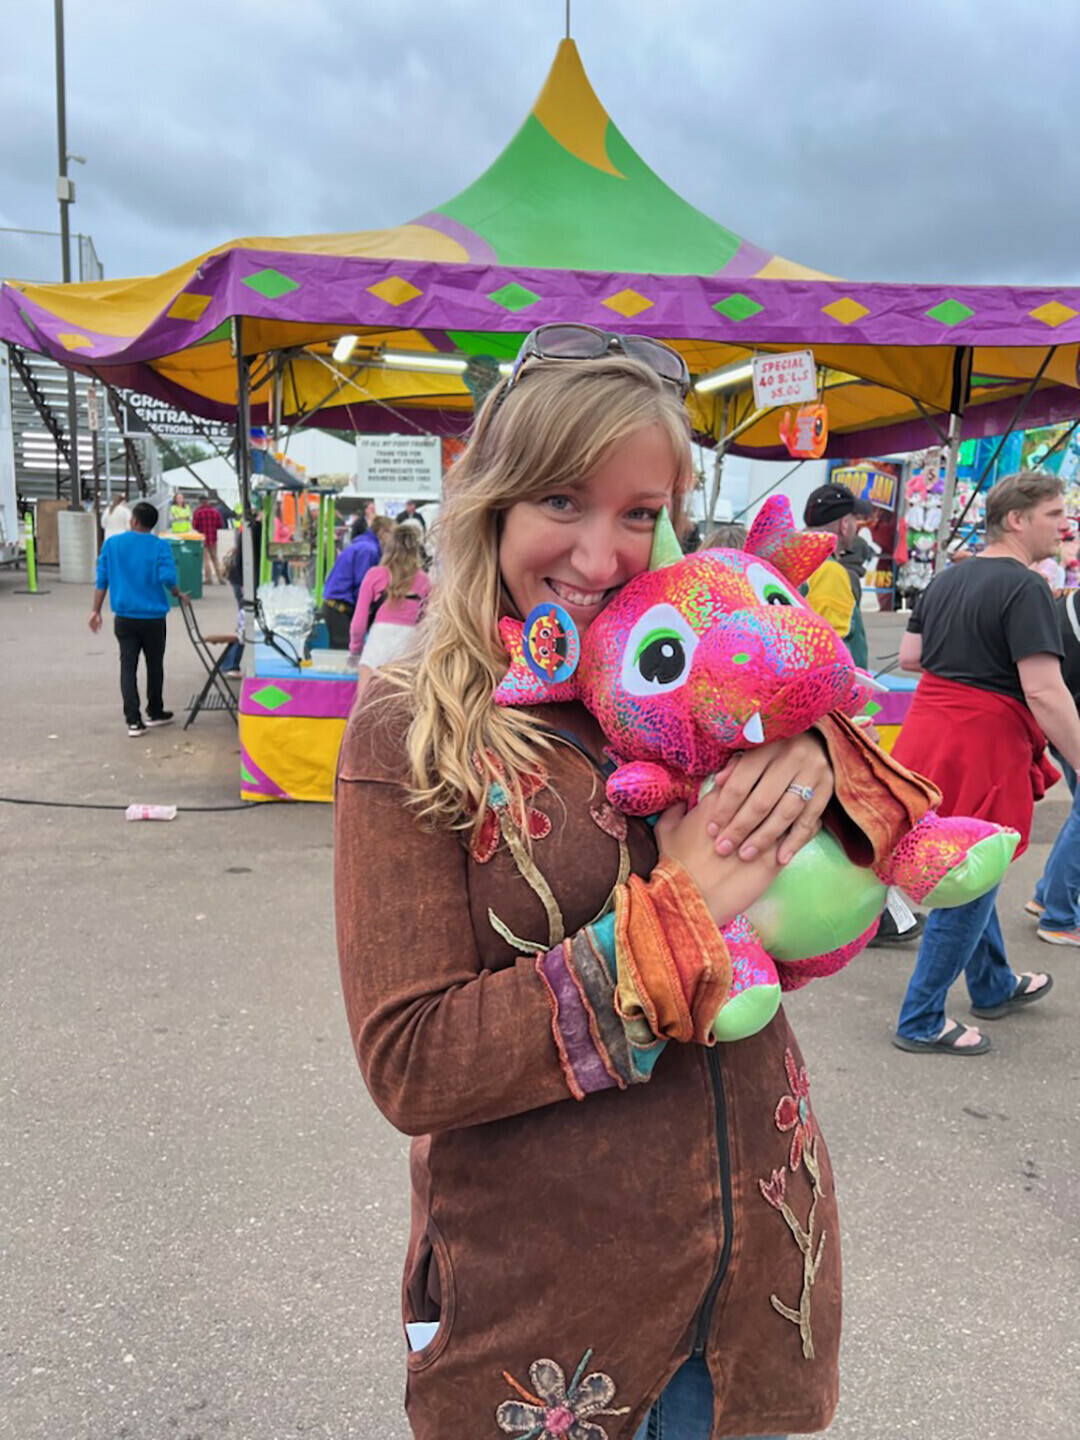 The writer found success at the Northern Wisconsin State Fair in Chippewa Falls.